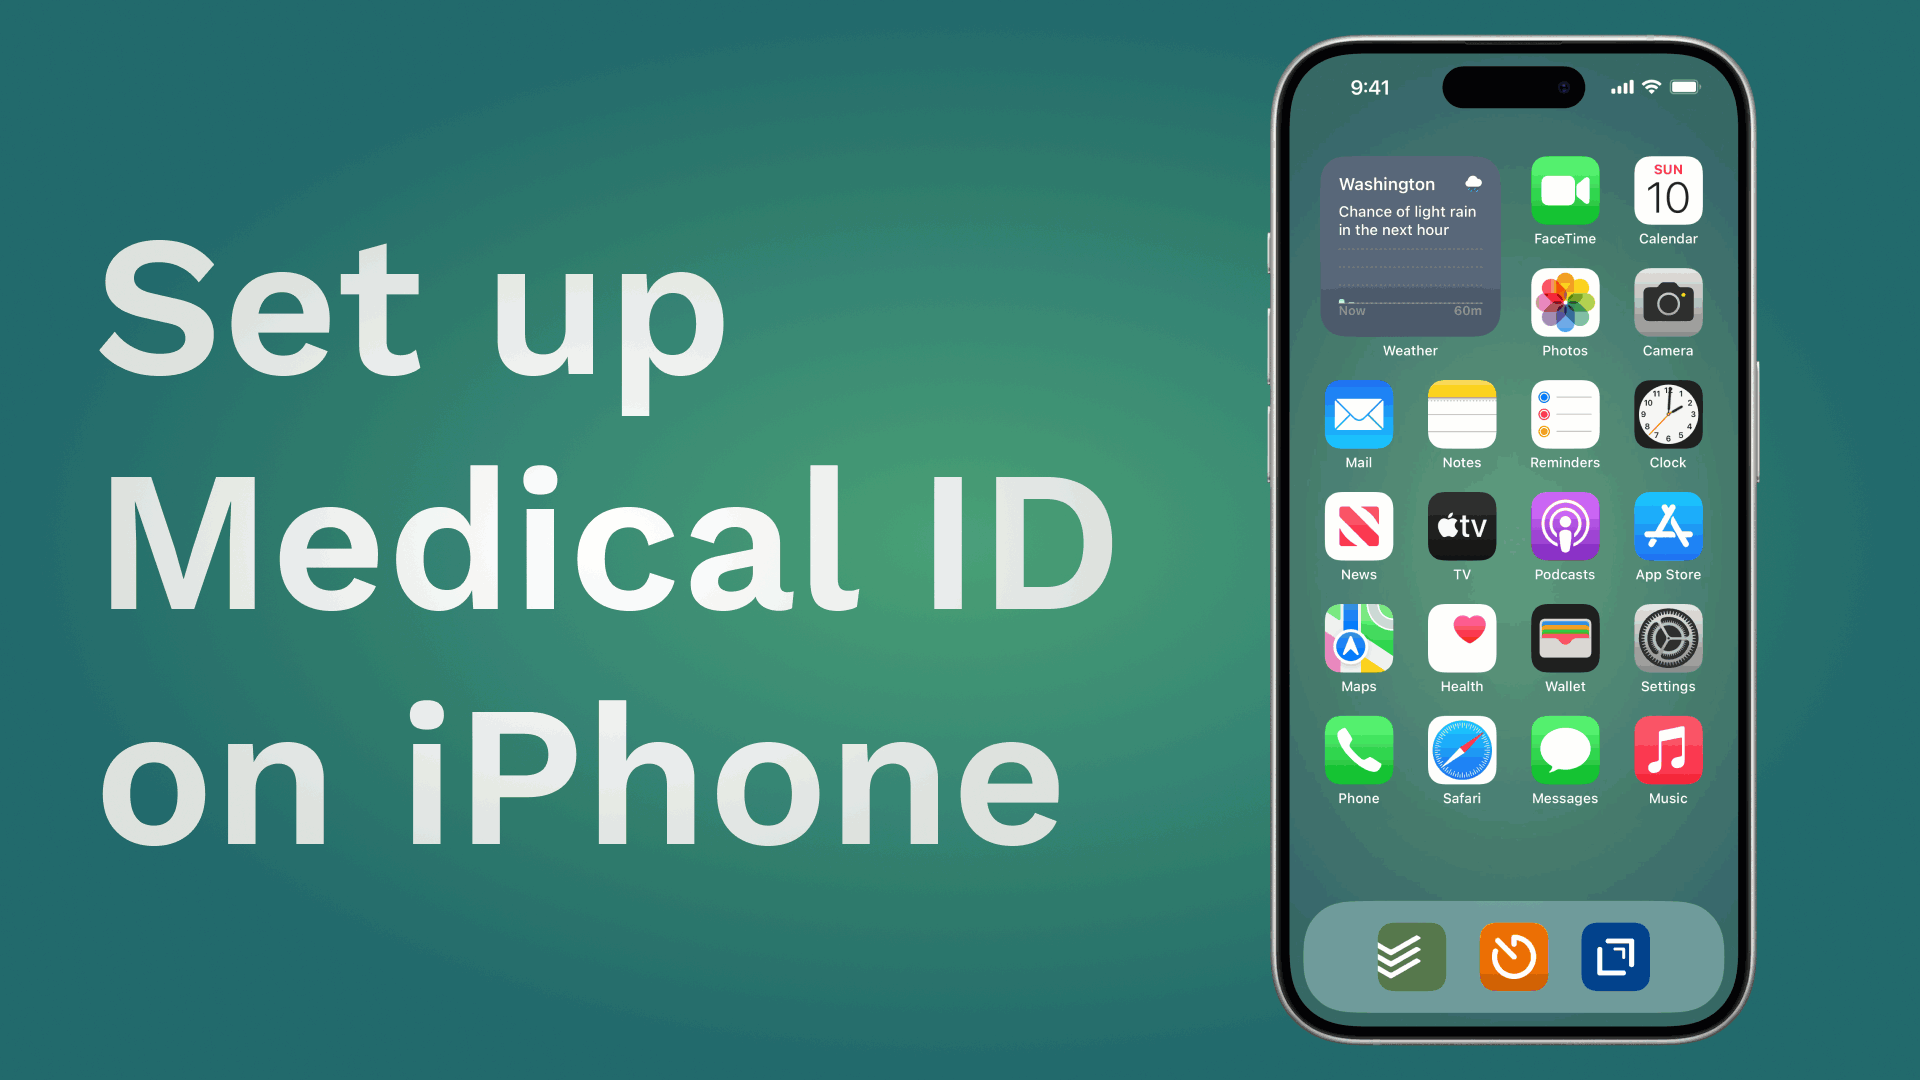 Step-by-step guide to setting up Medical ID on iPhone for emergency contact and health information.